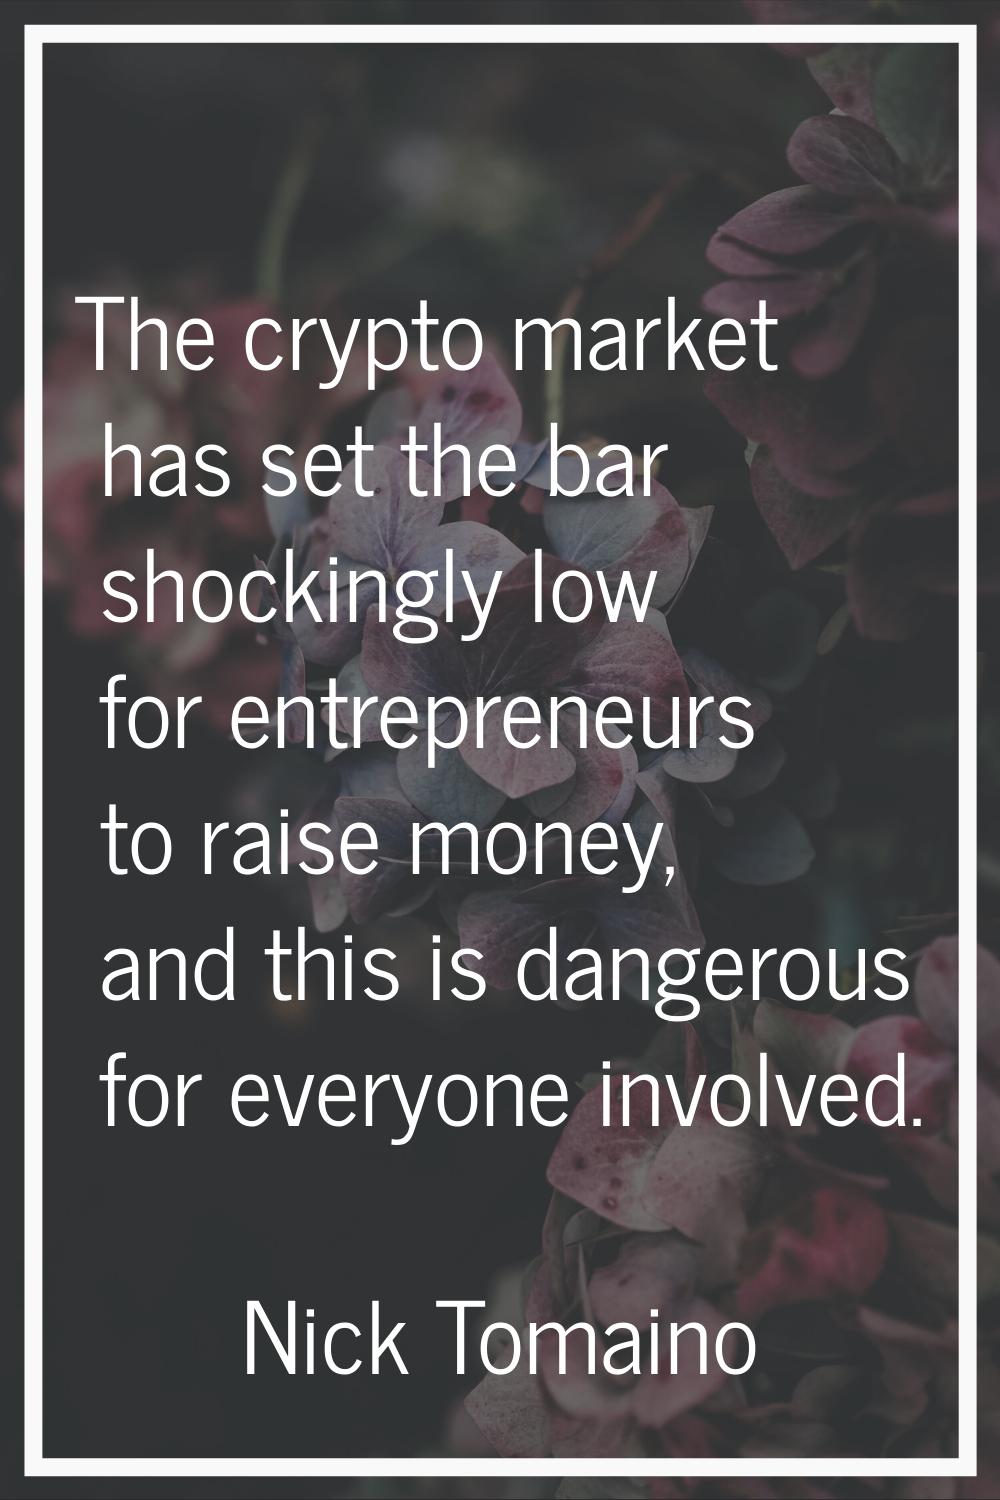 The crypto market has set the bar shockingly low for entrepreneurs to raise money, and this is dang